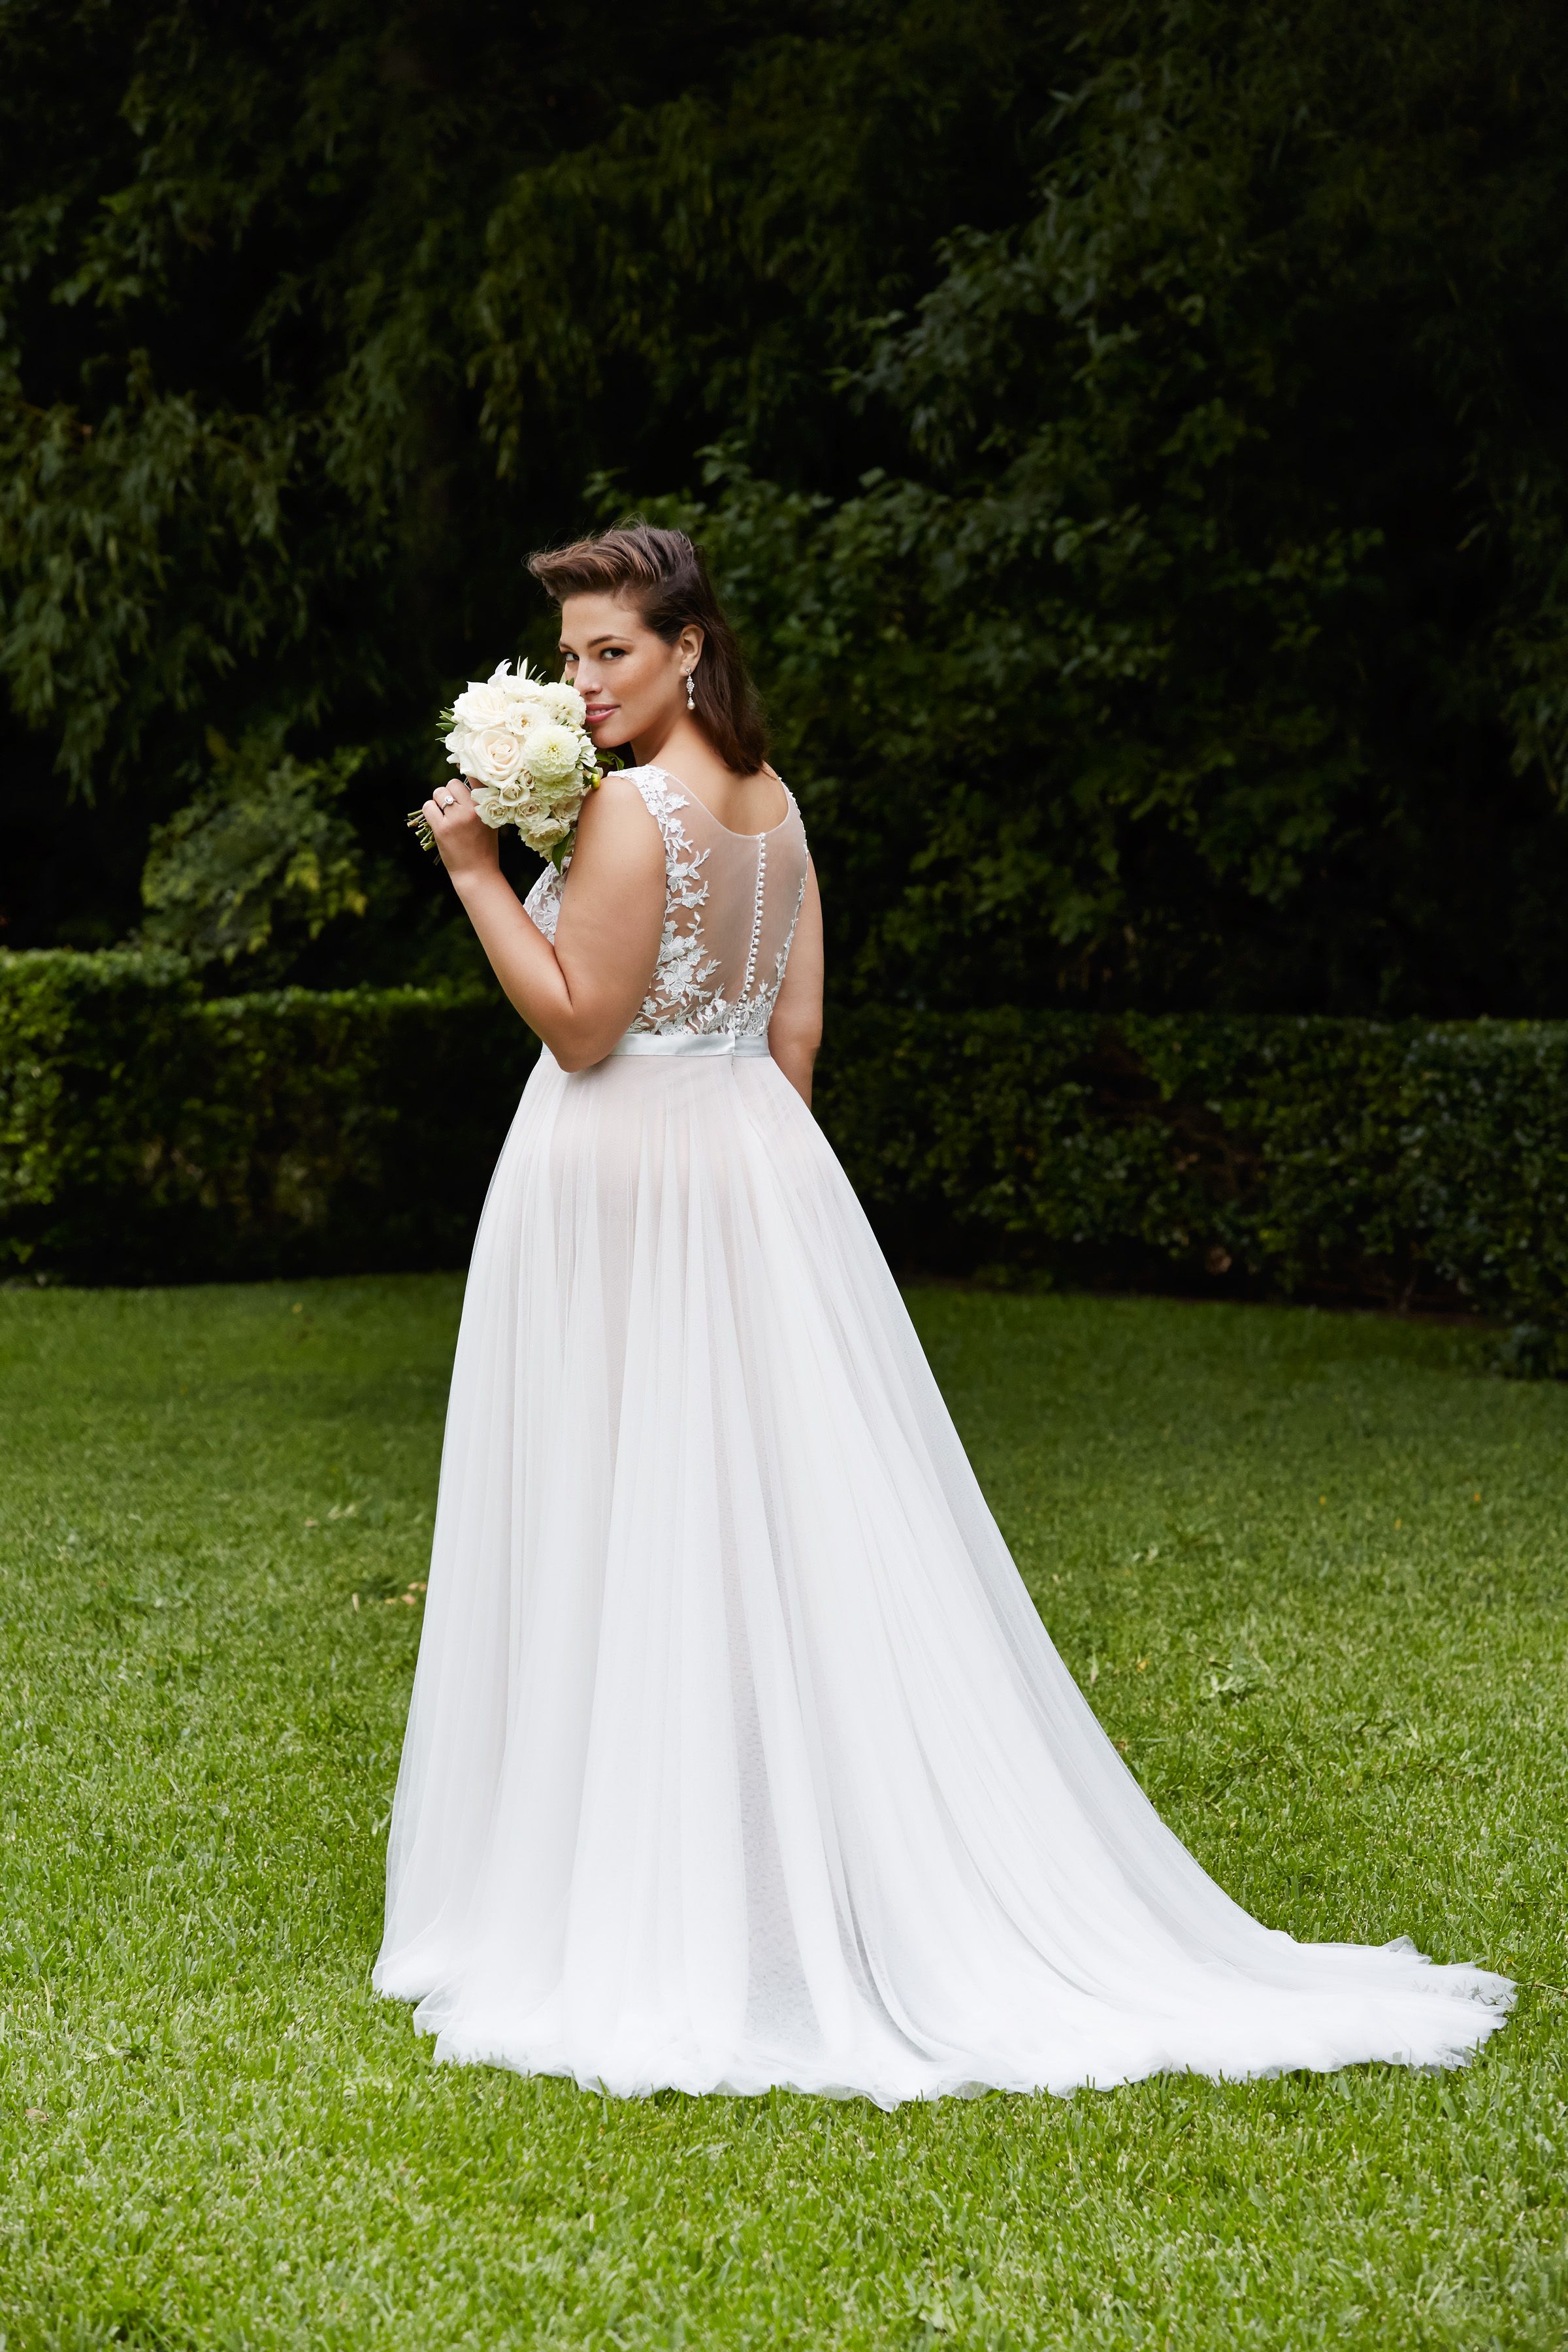 Plus Size Wedding Dresses for the Modern Bride - 5 Wedding Dress Designers  for the Curvy Bride